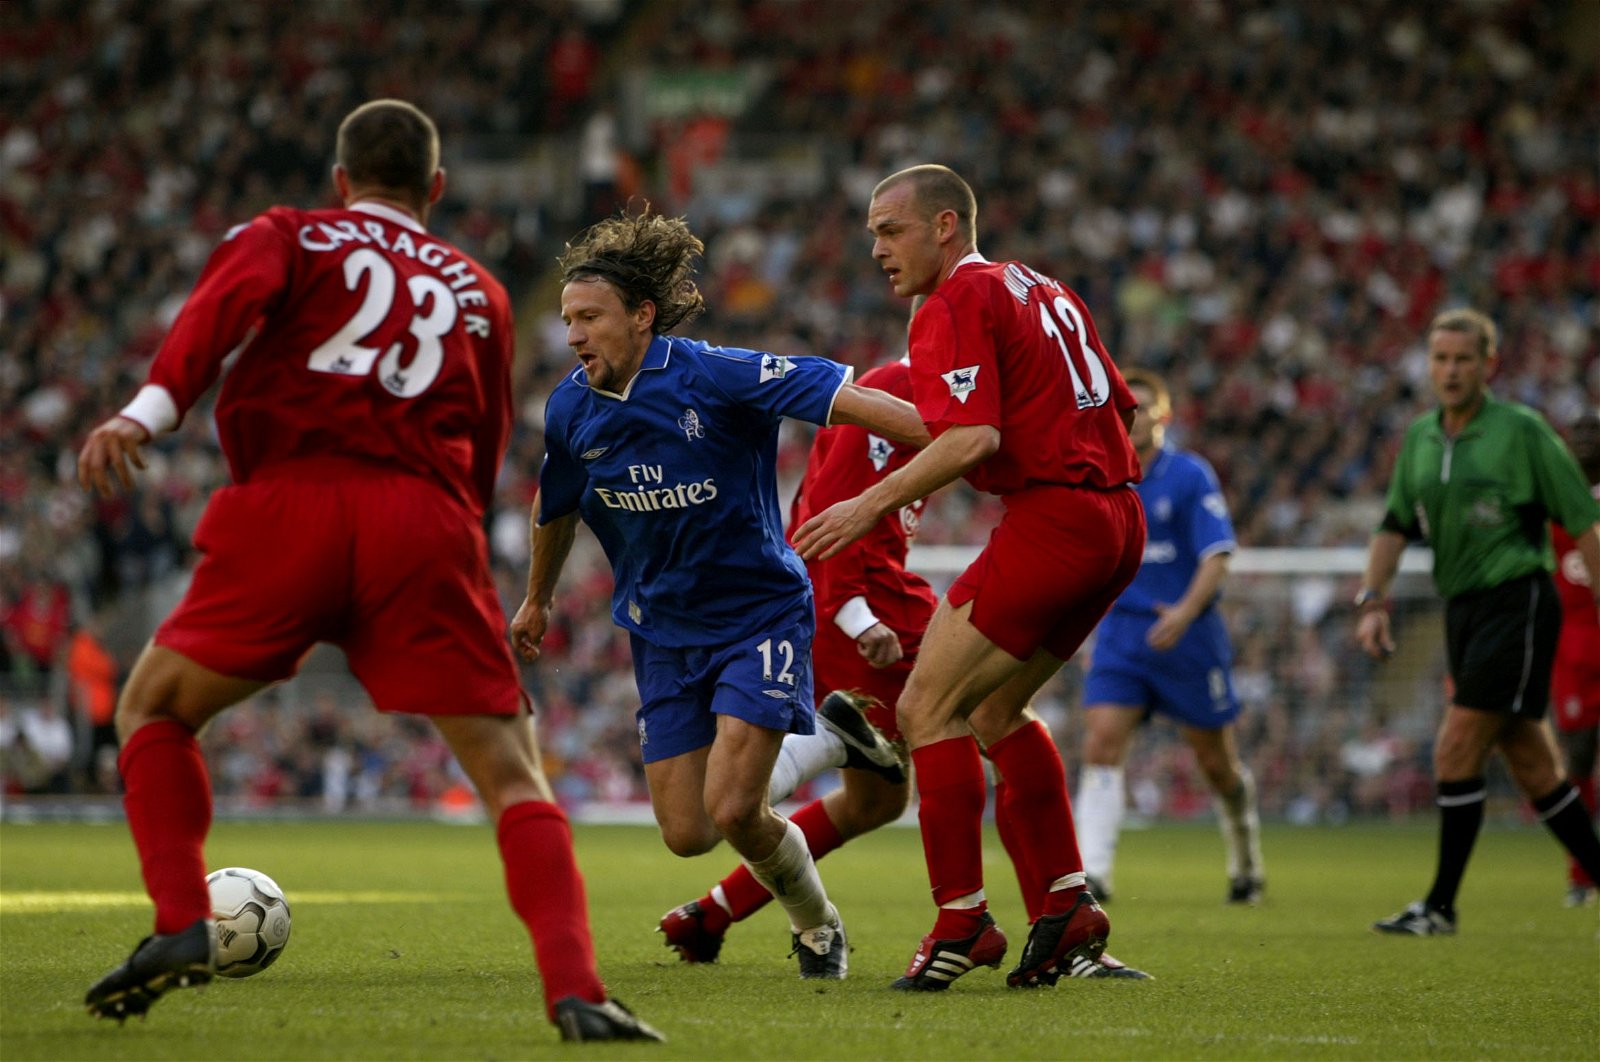 The match that changed Chelsea’s history forever